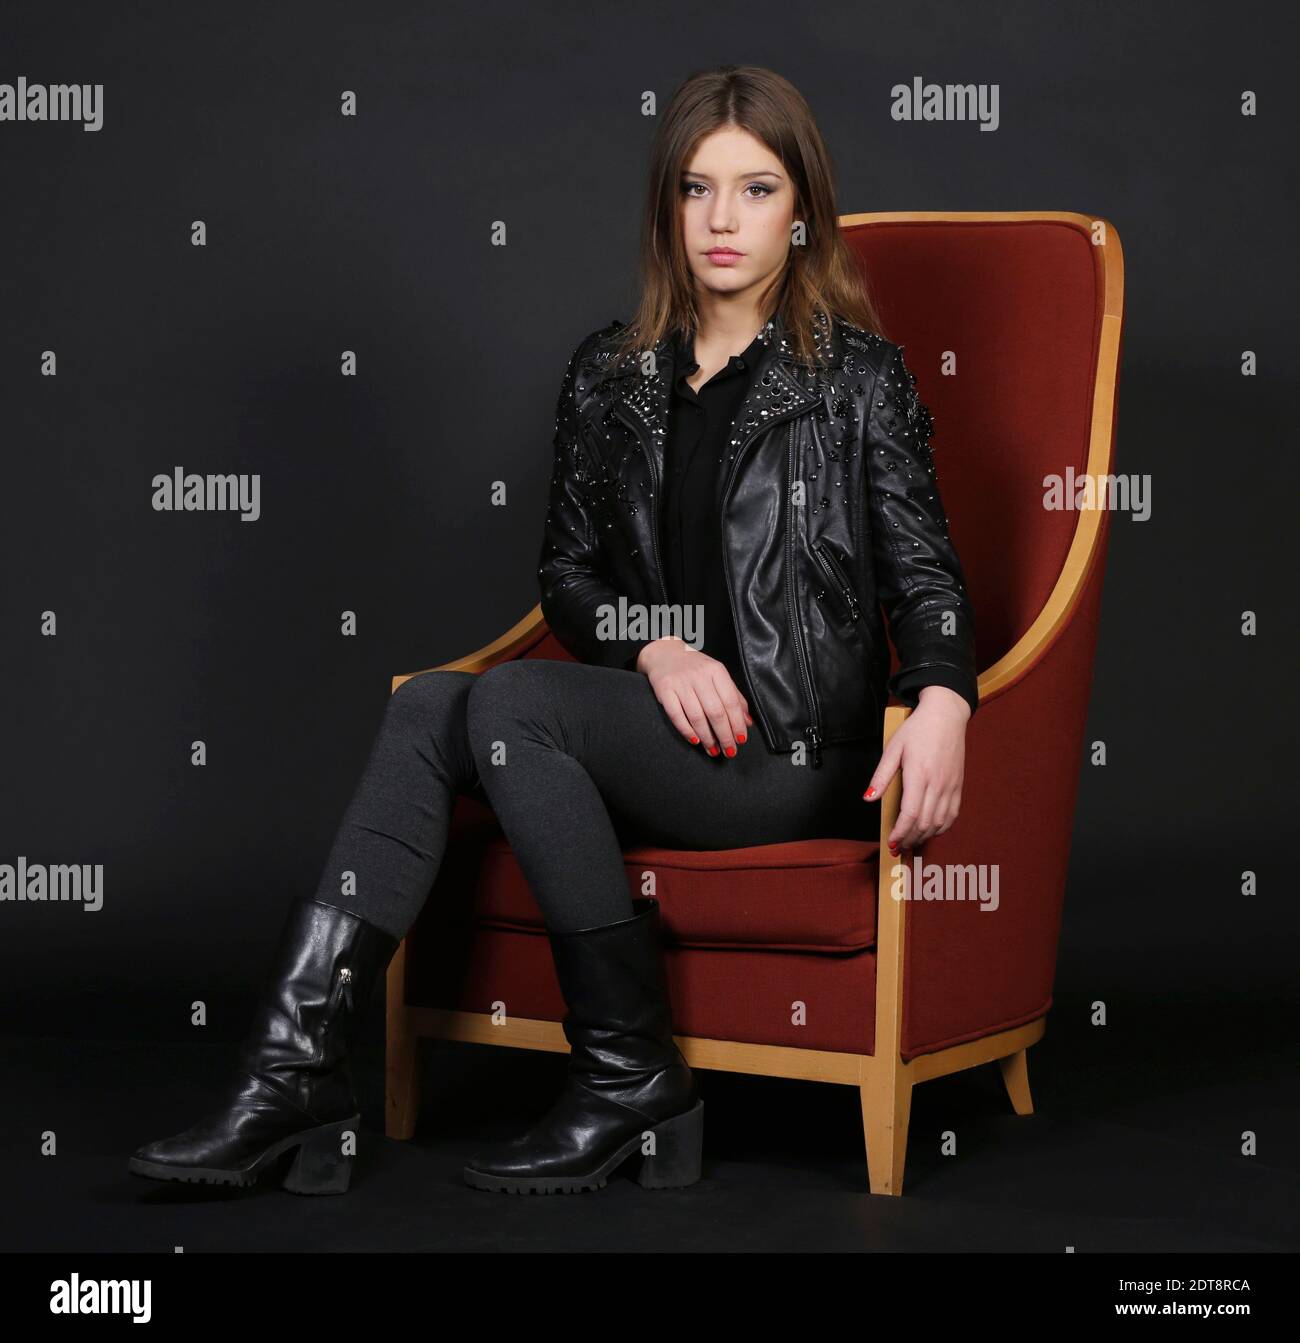 EXCLUSIVE. Adele Exarchopoulos poses for the Cinema award Romy Schneider  prize in Paris, France on March 10, 2014. Adele Exarchopoulos, Lea Seydoux  and Marine Vacth are competiting for the prize given on